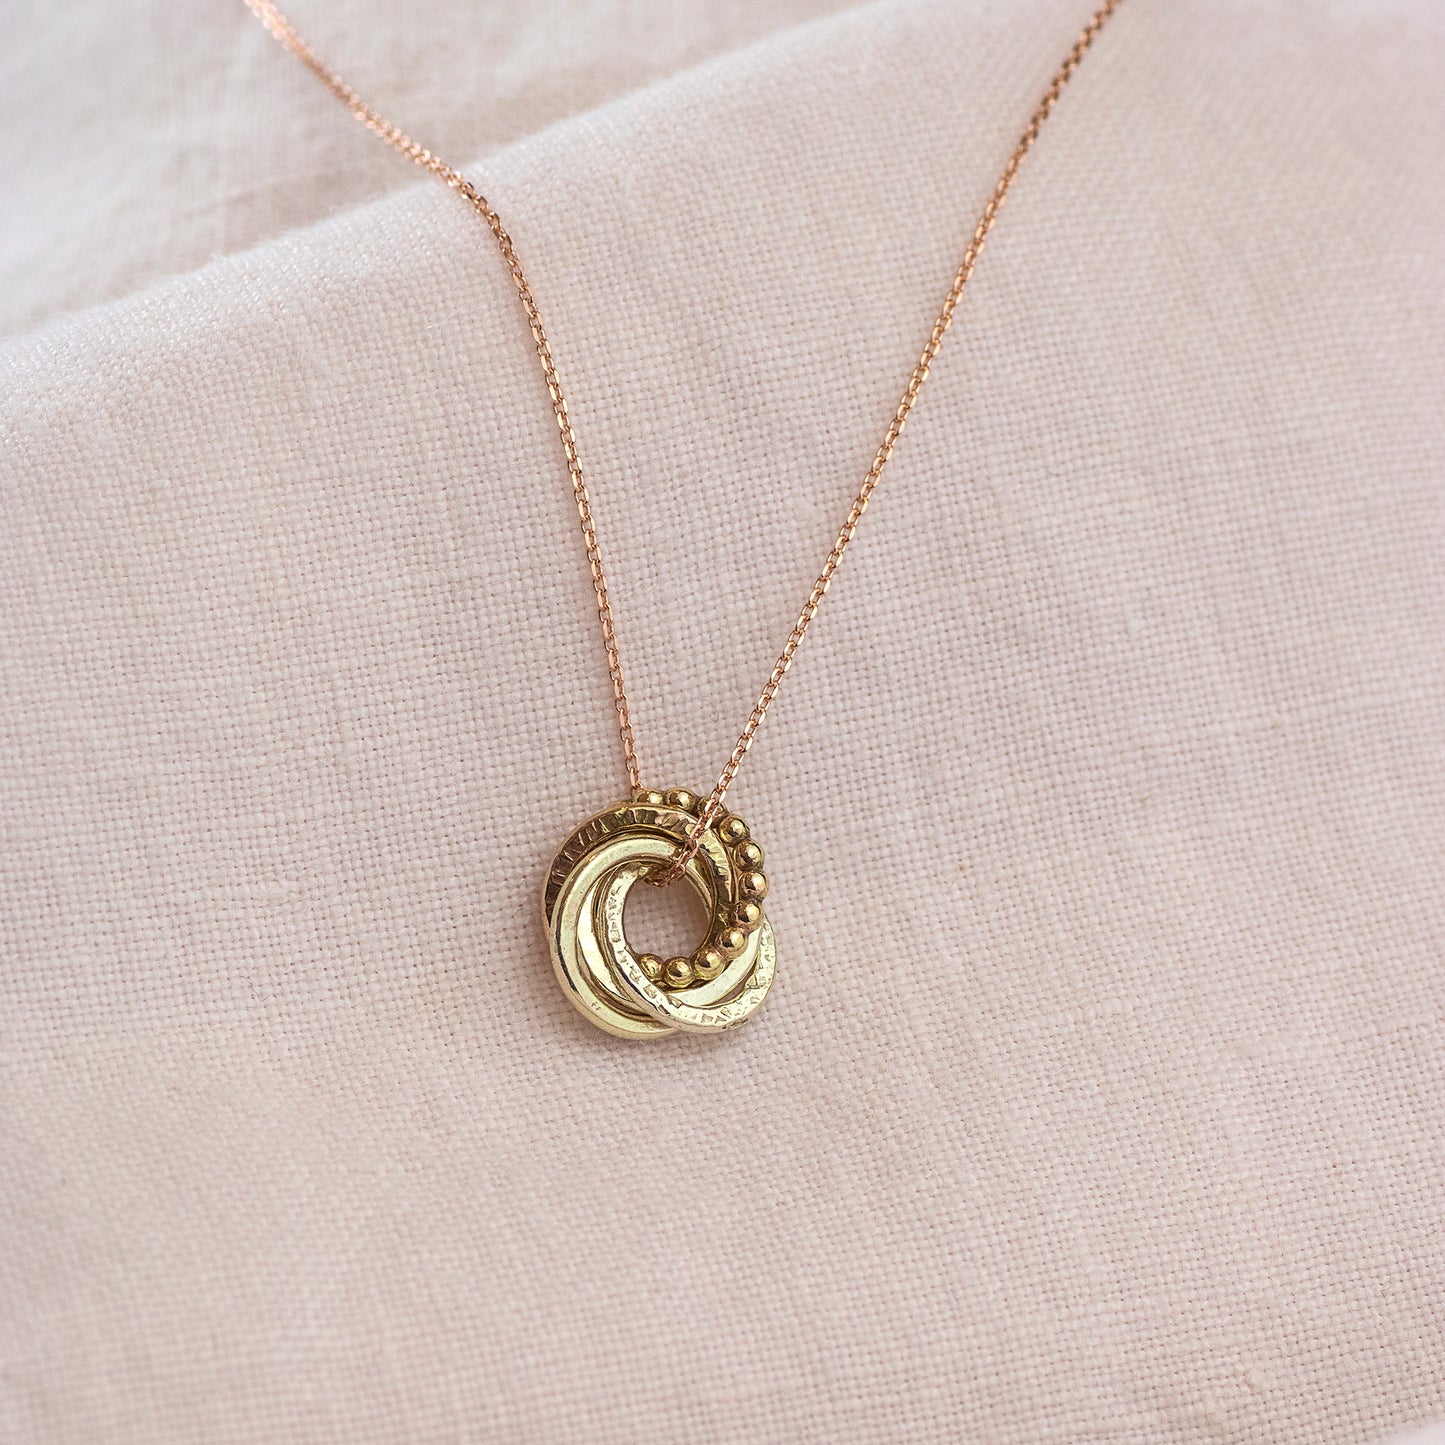 9kt Gold 5th Anniversary Love Knot Necklace -  The Original 5 Links for 5 Years Necklace - Recycled Gold, Rose Gold & White Gold